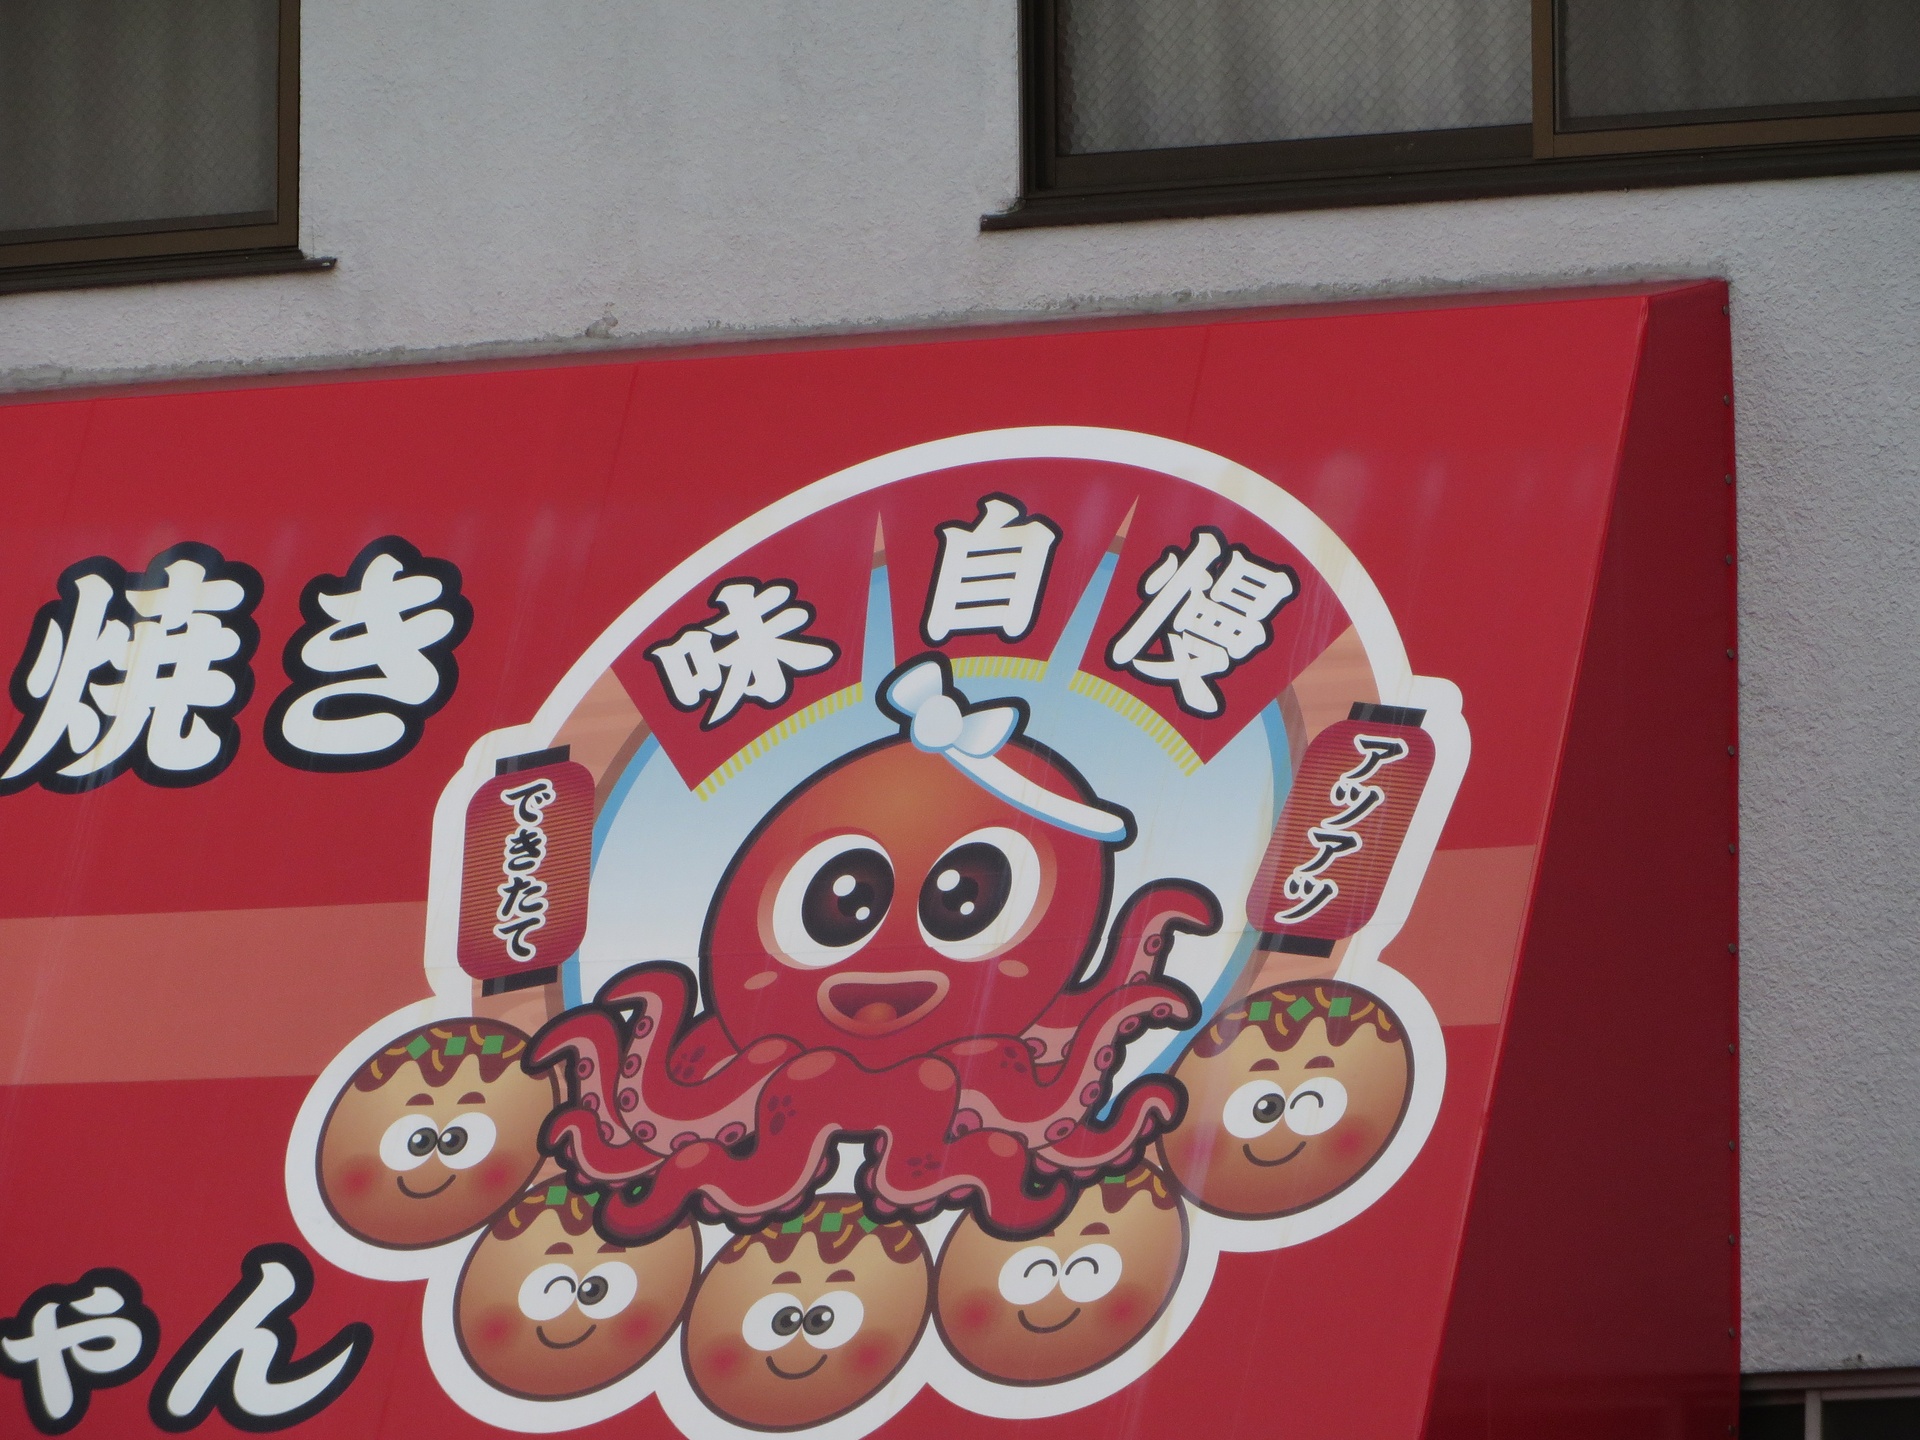 Cute red octopus sign with lanterns and food symbols on side of building